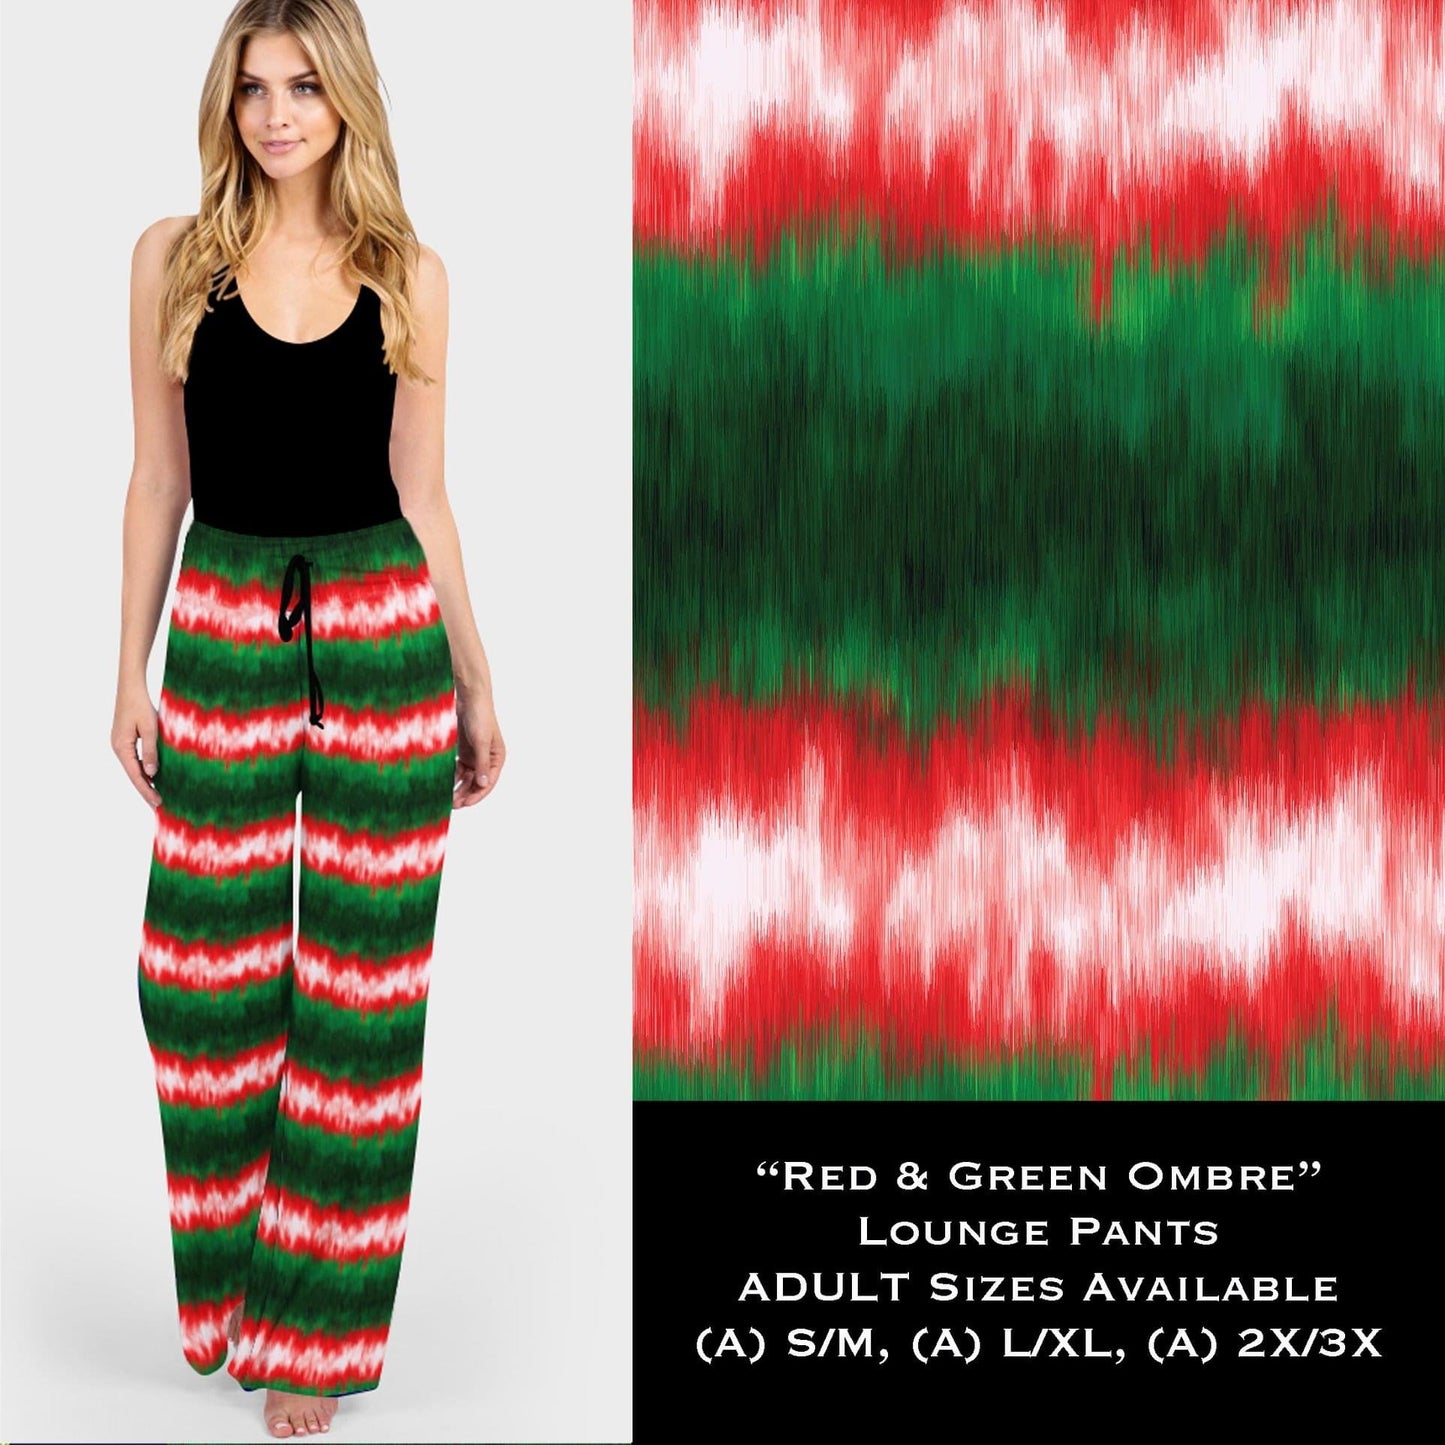 Red & Green Ombre Lounge Pants